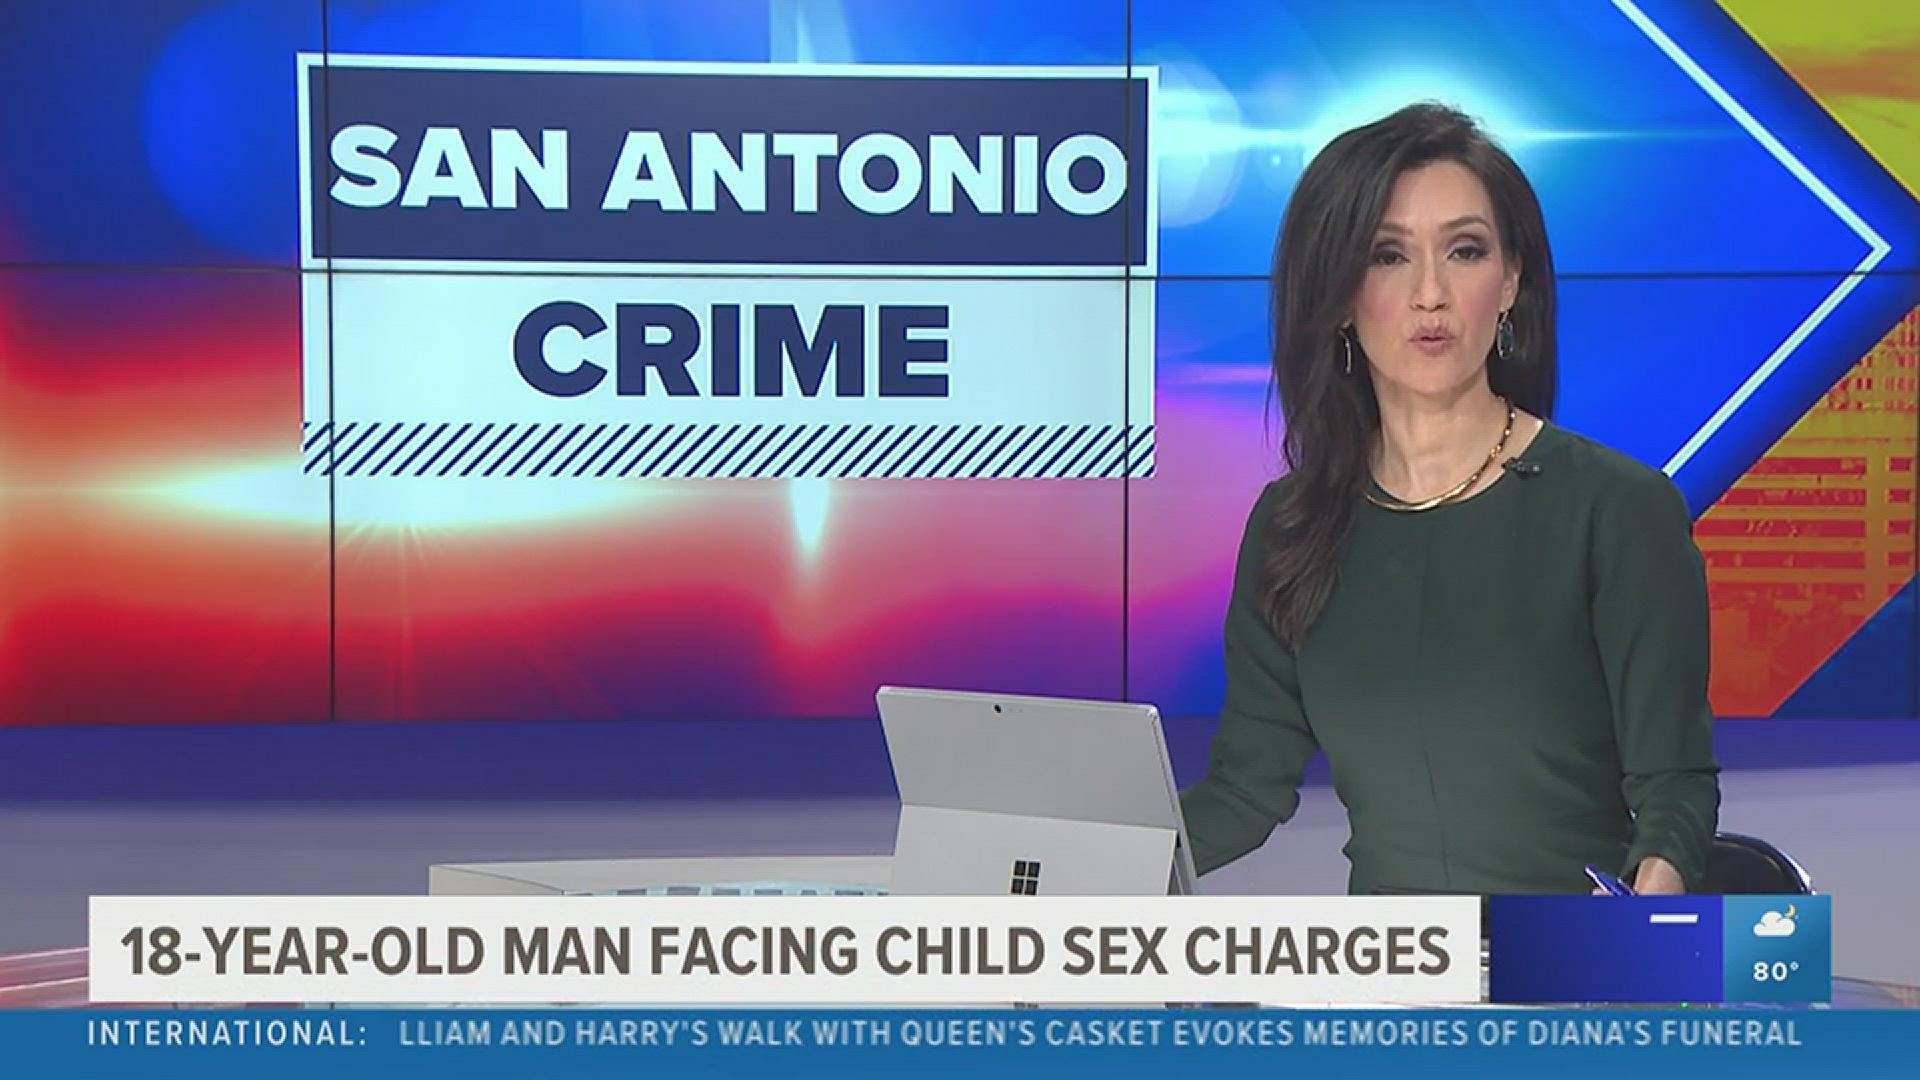 Yanggirlxxx - 18-year-old arrested and facing three child sex charges | kens5.com